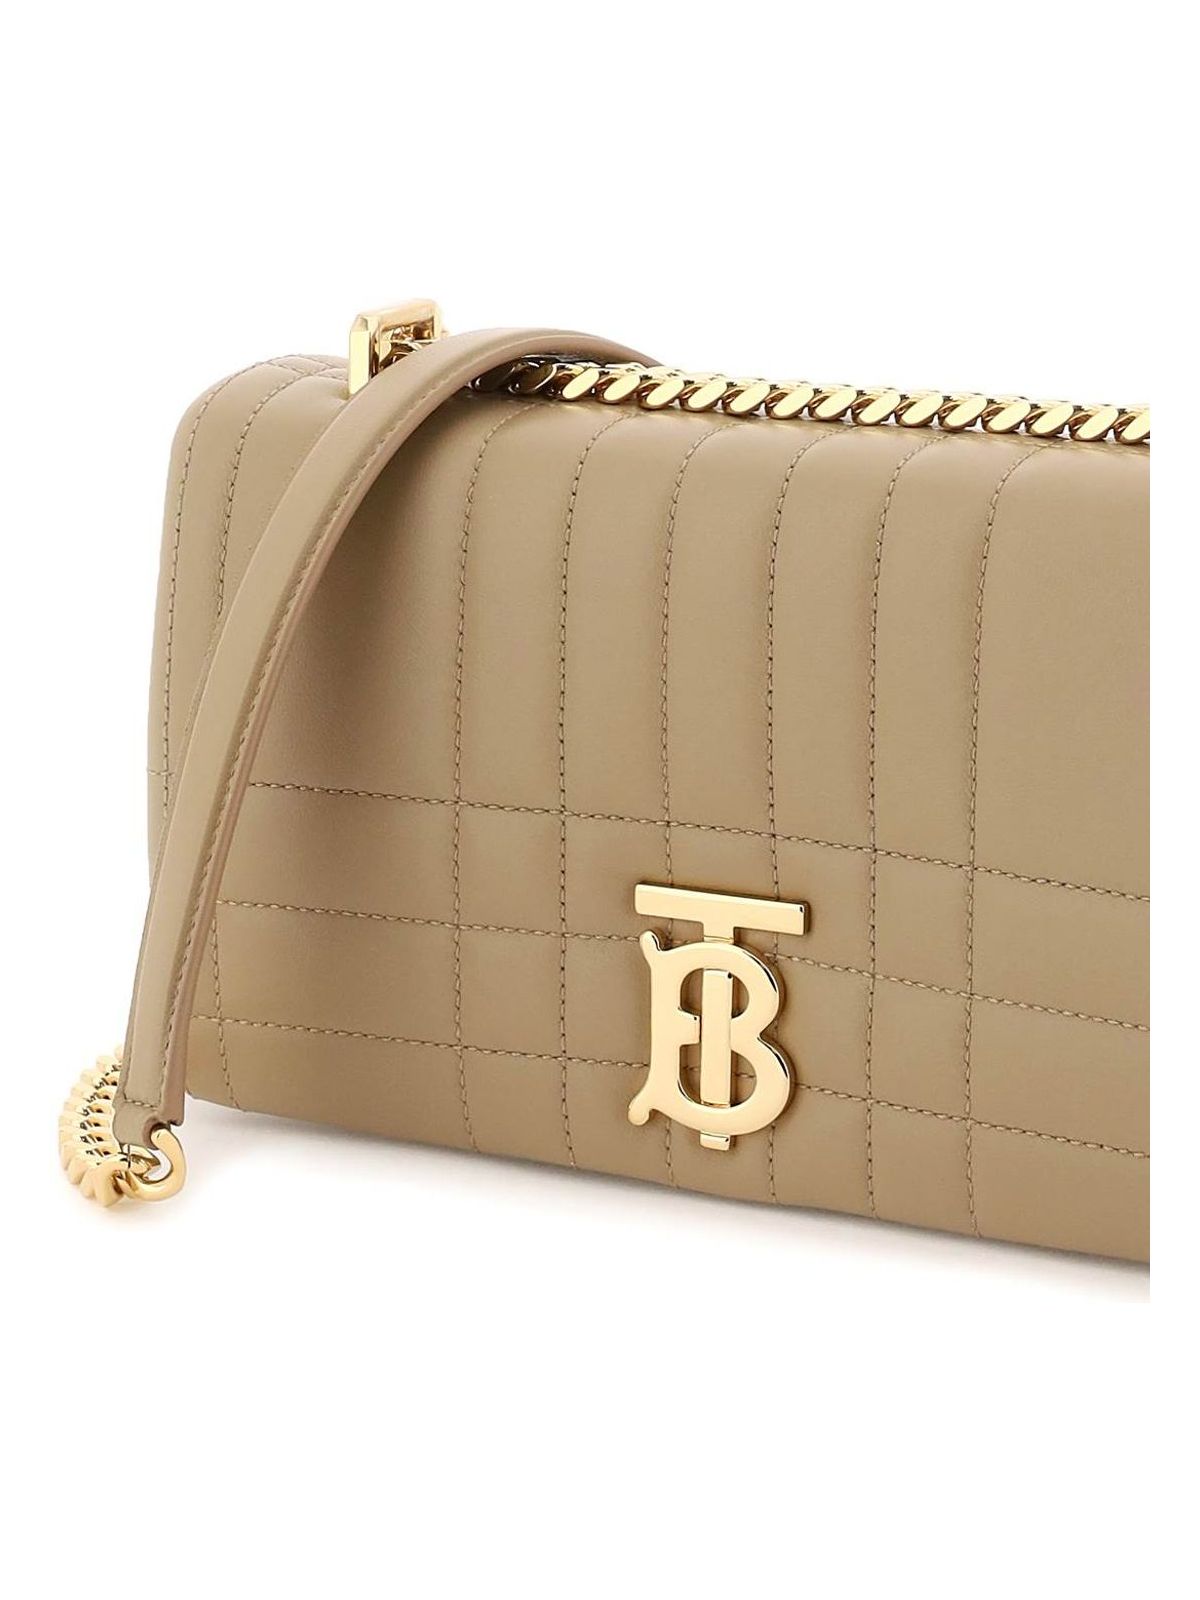 C4741 BURBERRY QUILTED LEATHER SMALL LOLA BAG